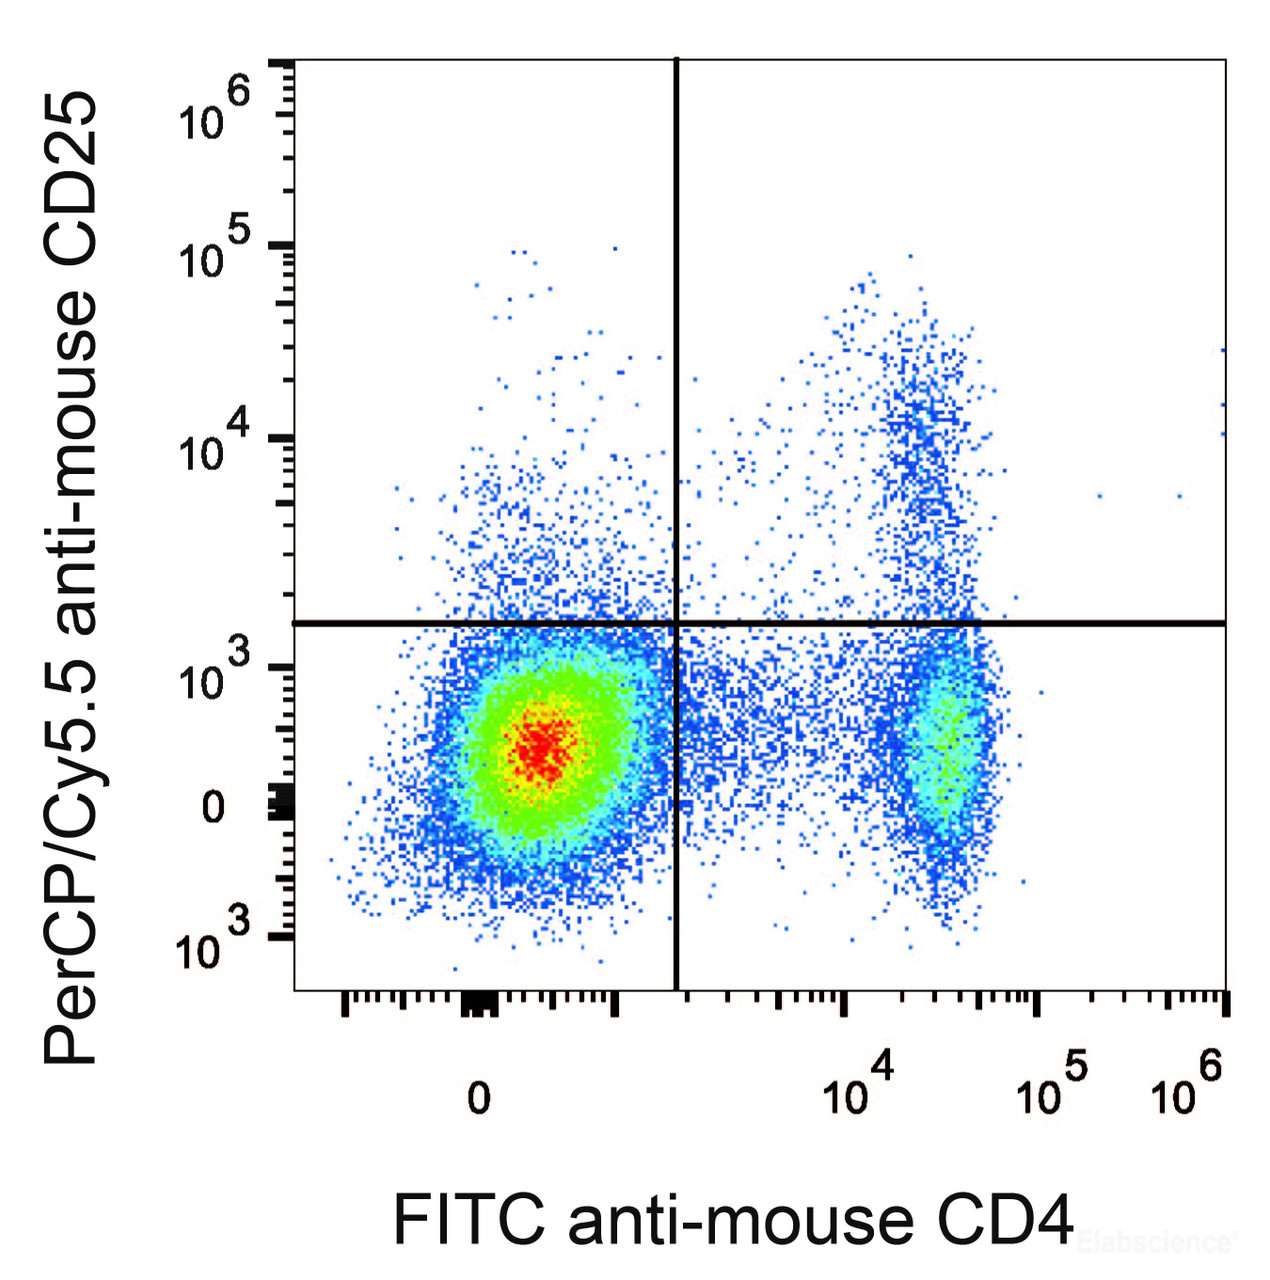 C57BL/6 murine splenocytes are stained with PerCP/Cyanine5.5 Anti-Mouse CD25 Antibody[Used at .2 μg/1<sup>6</sup> cells dilution] and FITC Anti-Mouse CD4 Antibody.